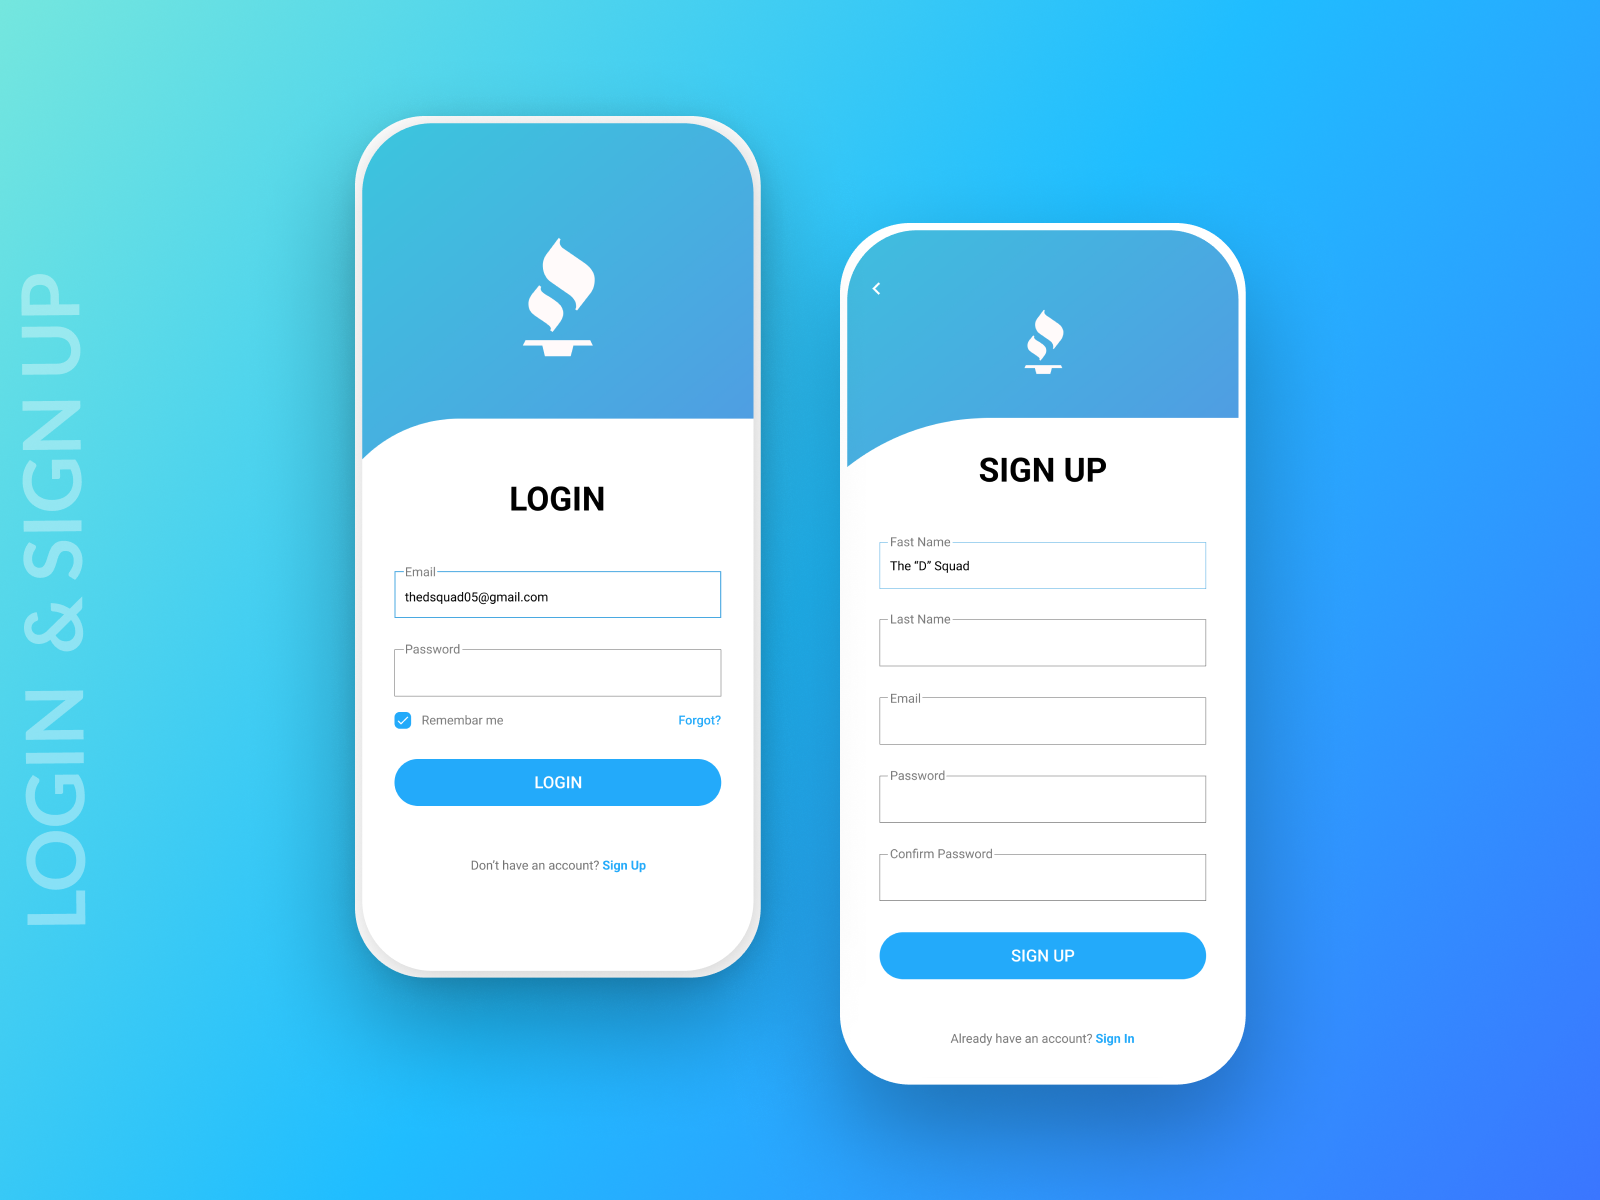 Minimalistic Login & Sign Up Page UI by The D Squad on Dribbble